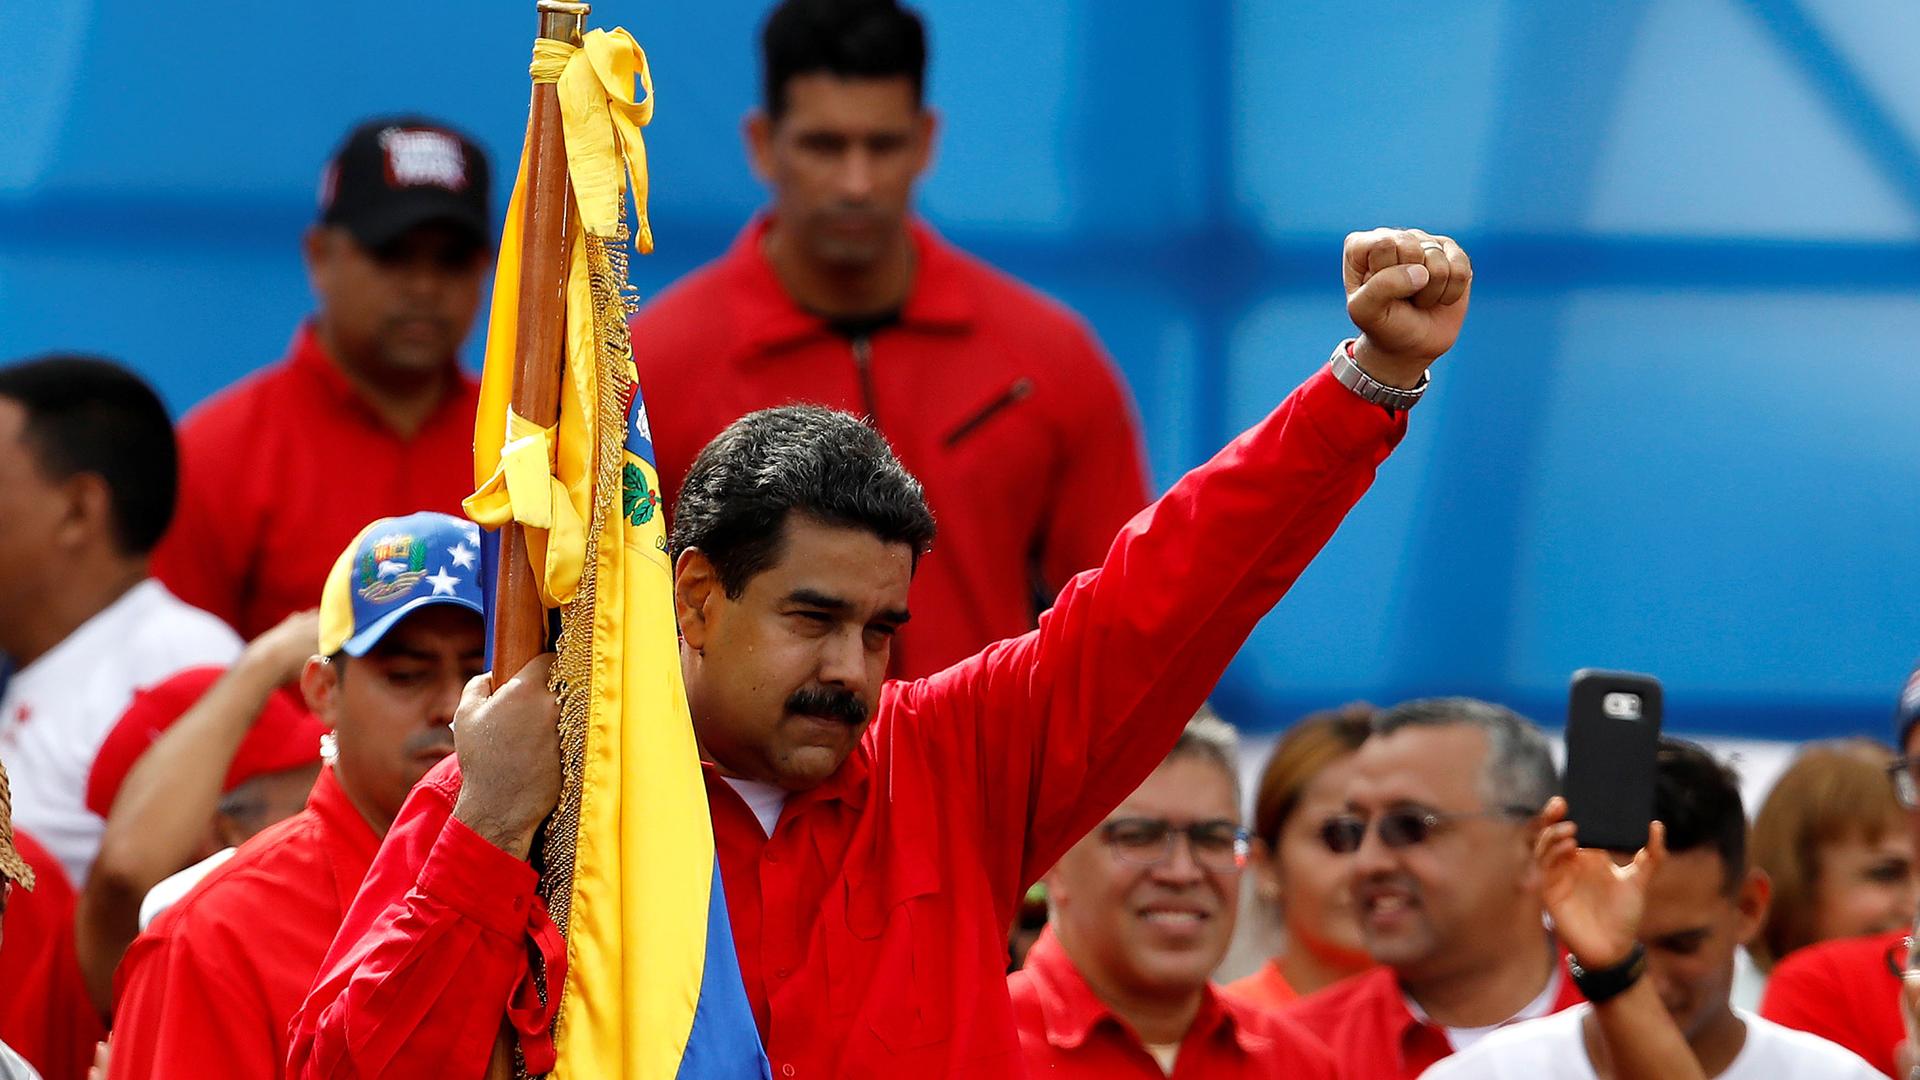 Venezuela's President Nicolás Maduro during the closing campaign ceremony for the Constituent Assembly election in Caracas, Venezuela, on July 27. 